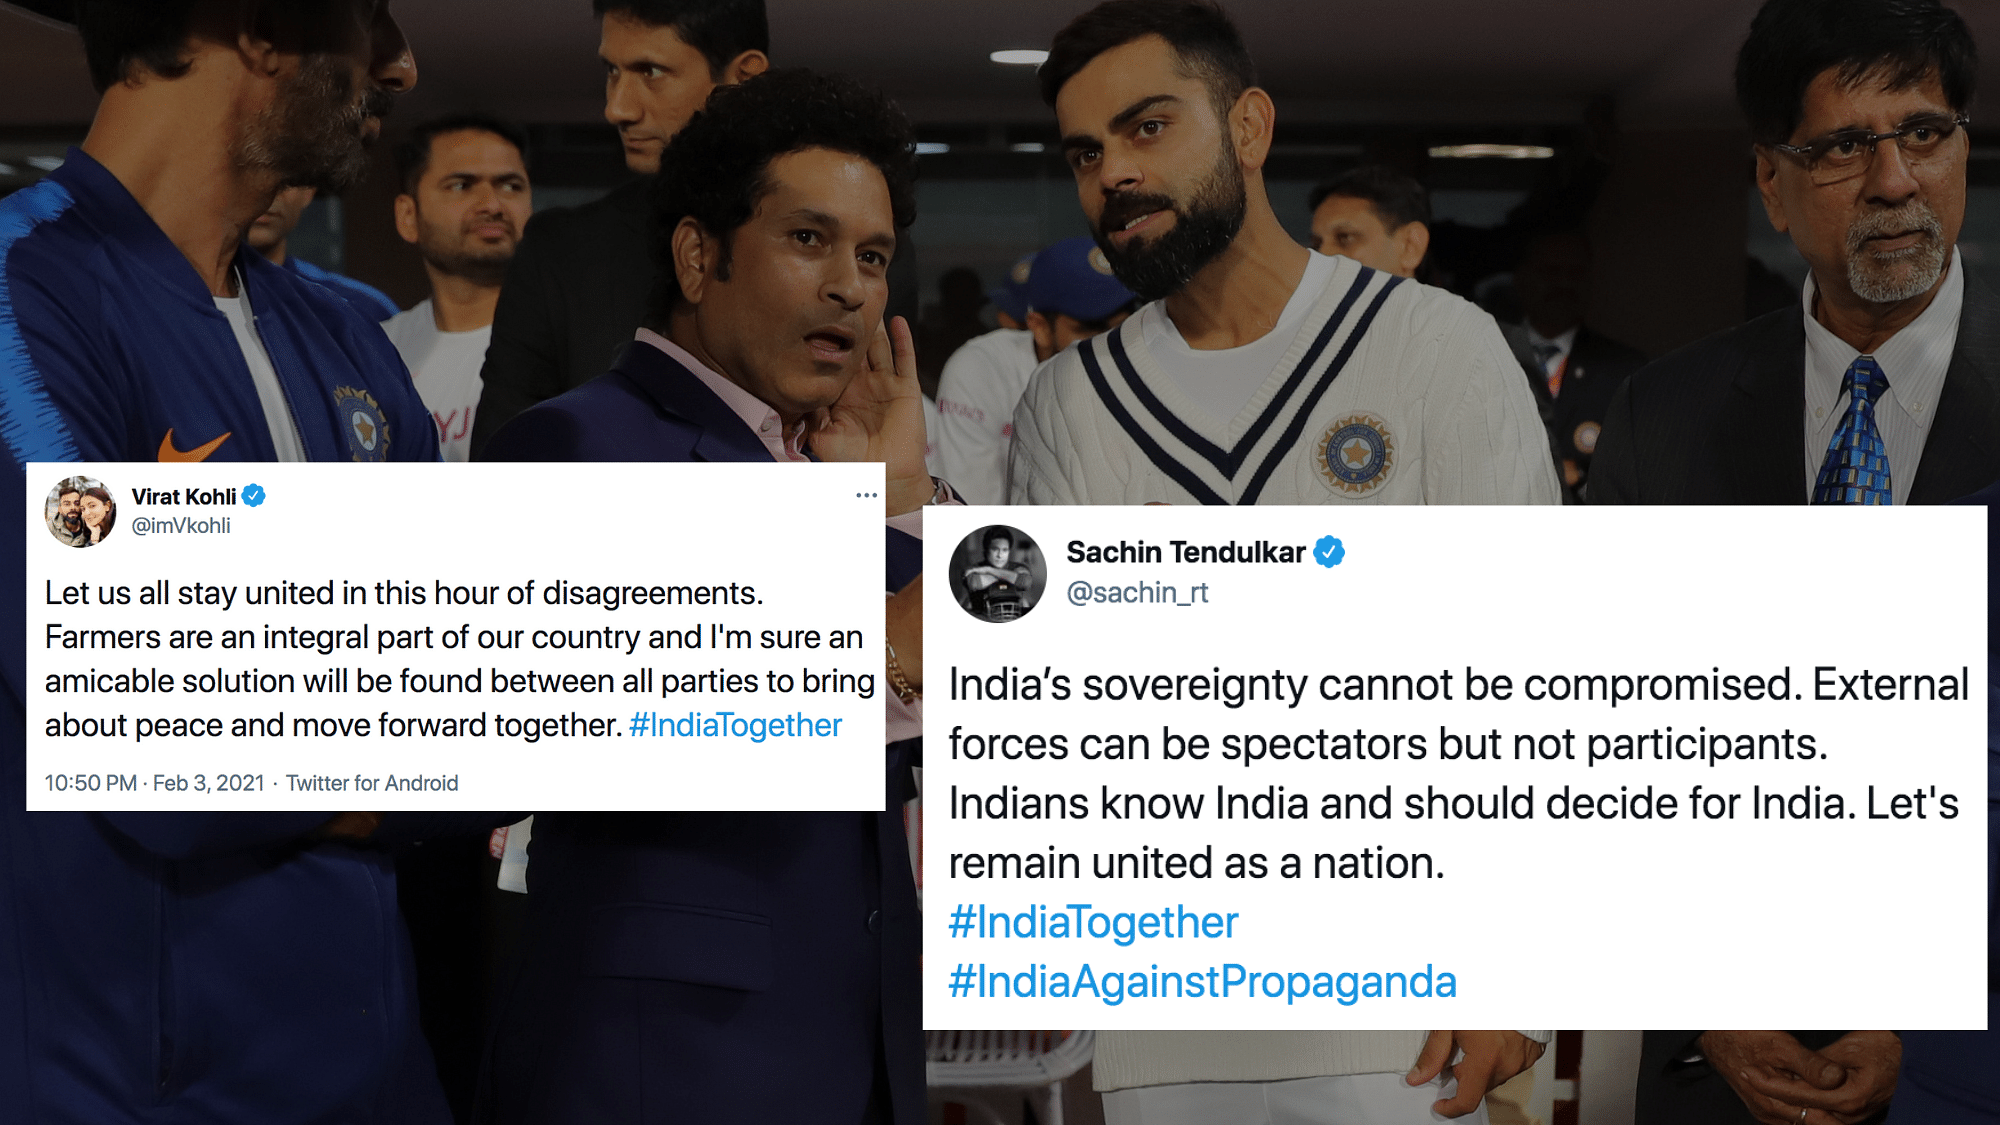 Sachin Tendulkar and Virat Kohli joined the ‘India together’ drive by leading the call for unity.